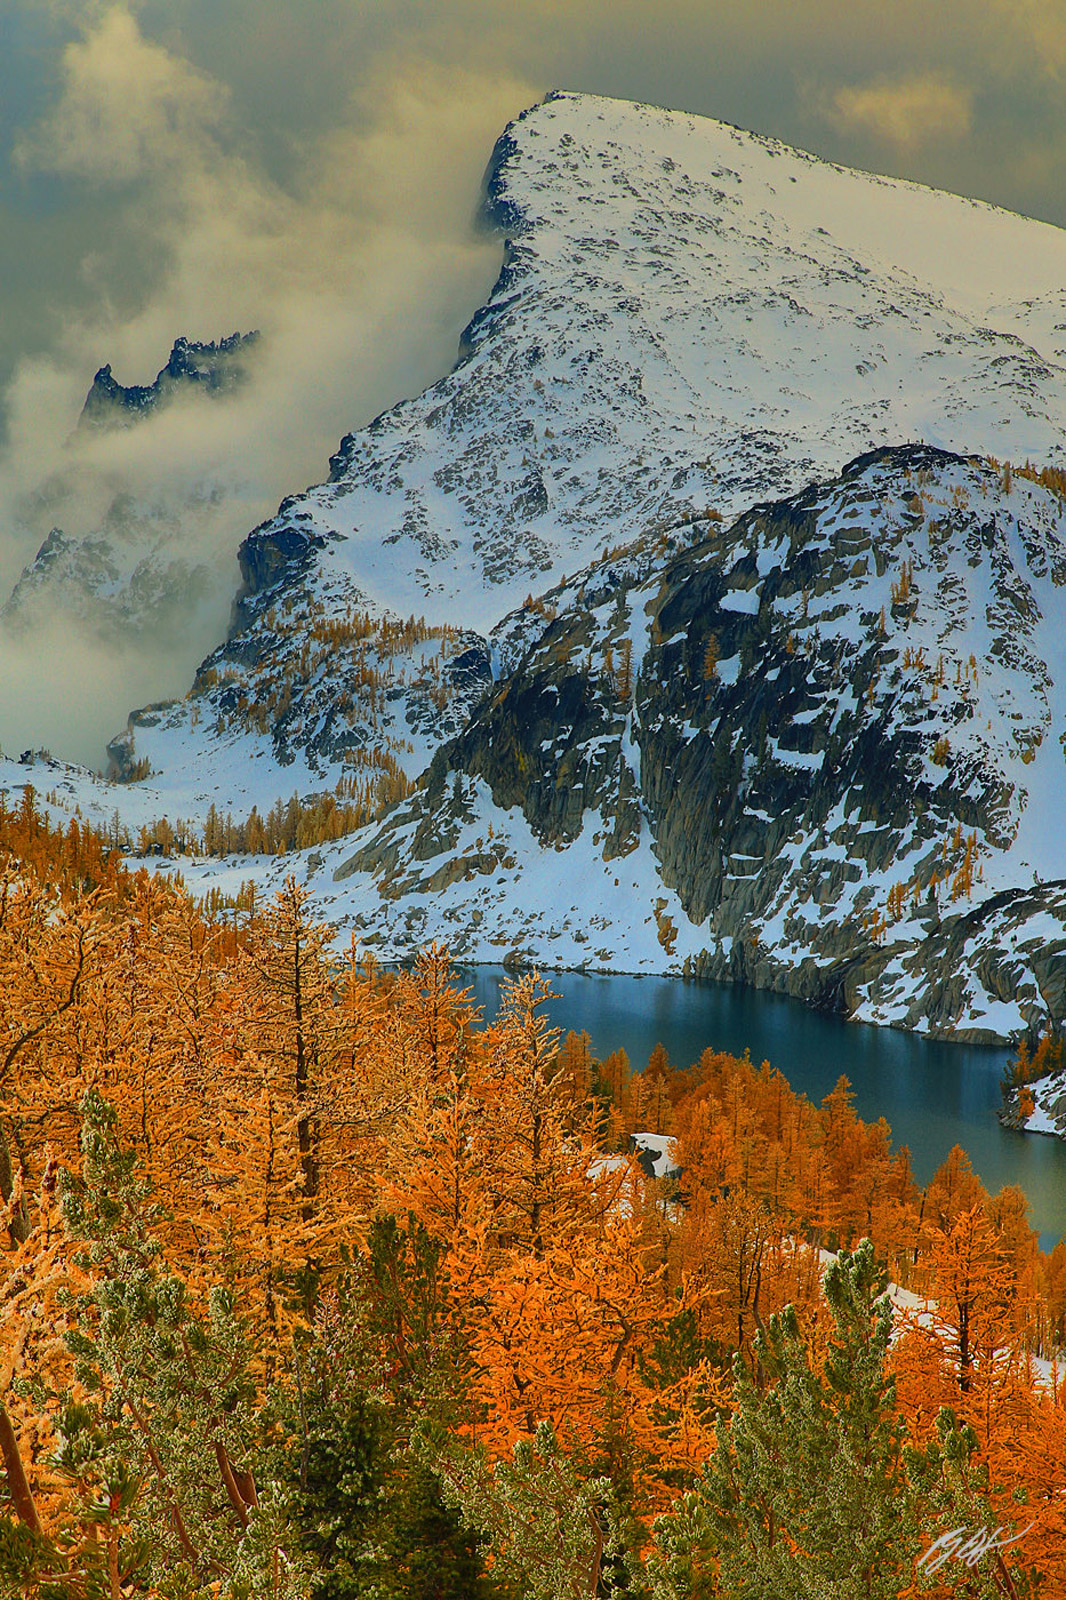 Golden Larch and Little Anna Purna in the Enchantments, Alpine Lakes Wilderness in Washington